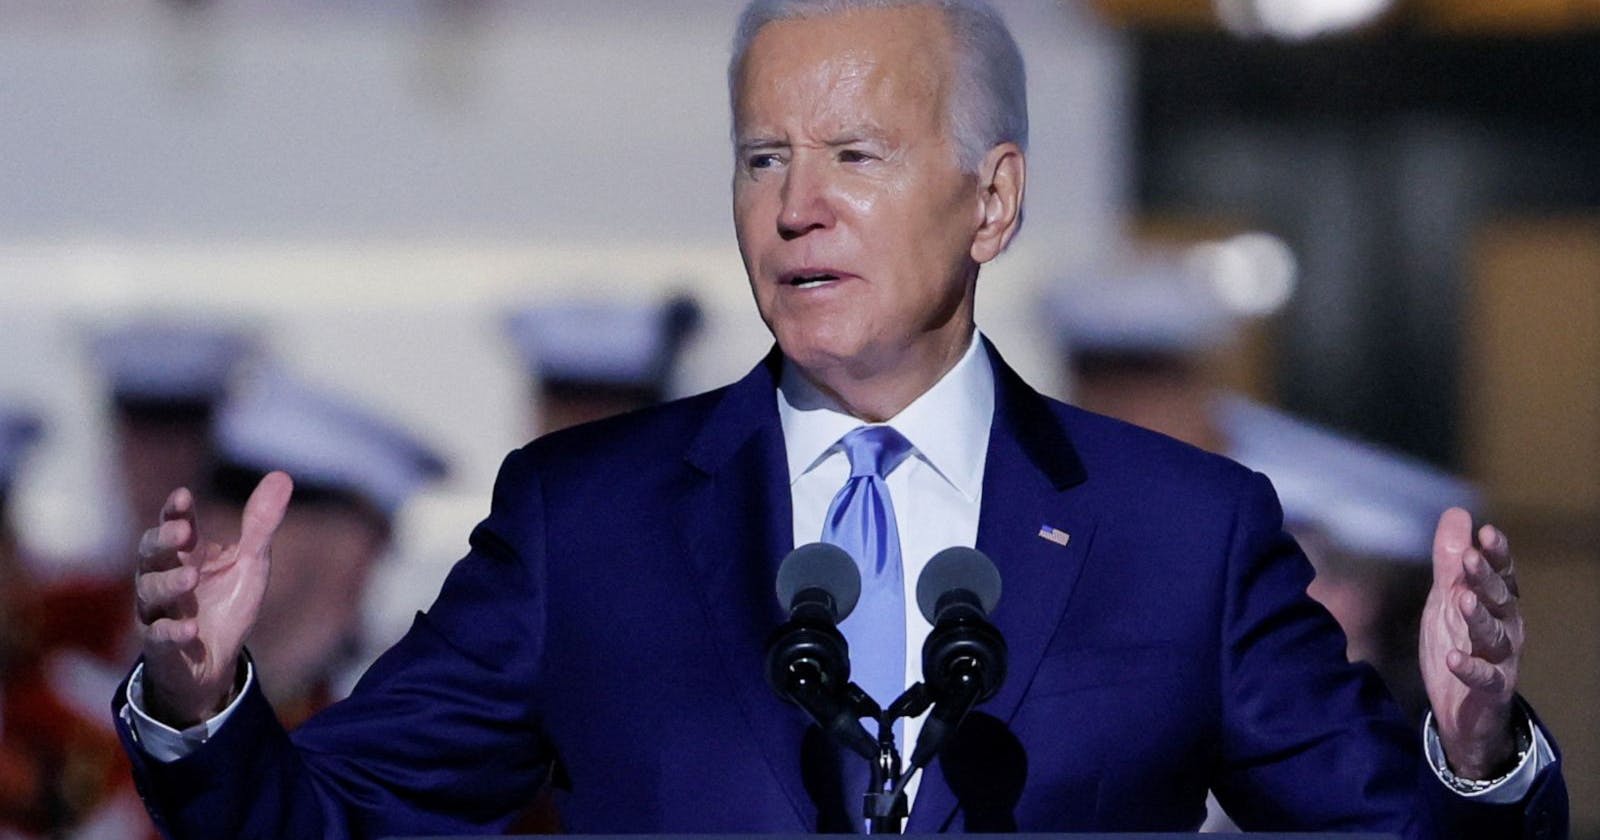 Biden said the survey finds broad opposition to the U.S. Supreme Court's